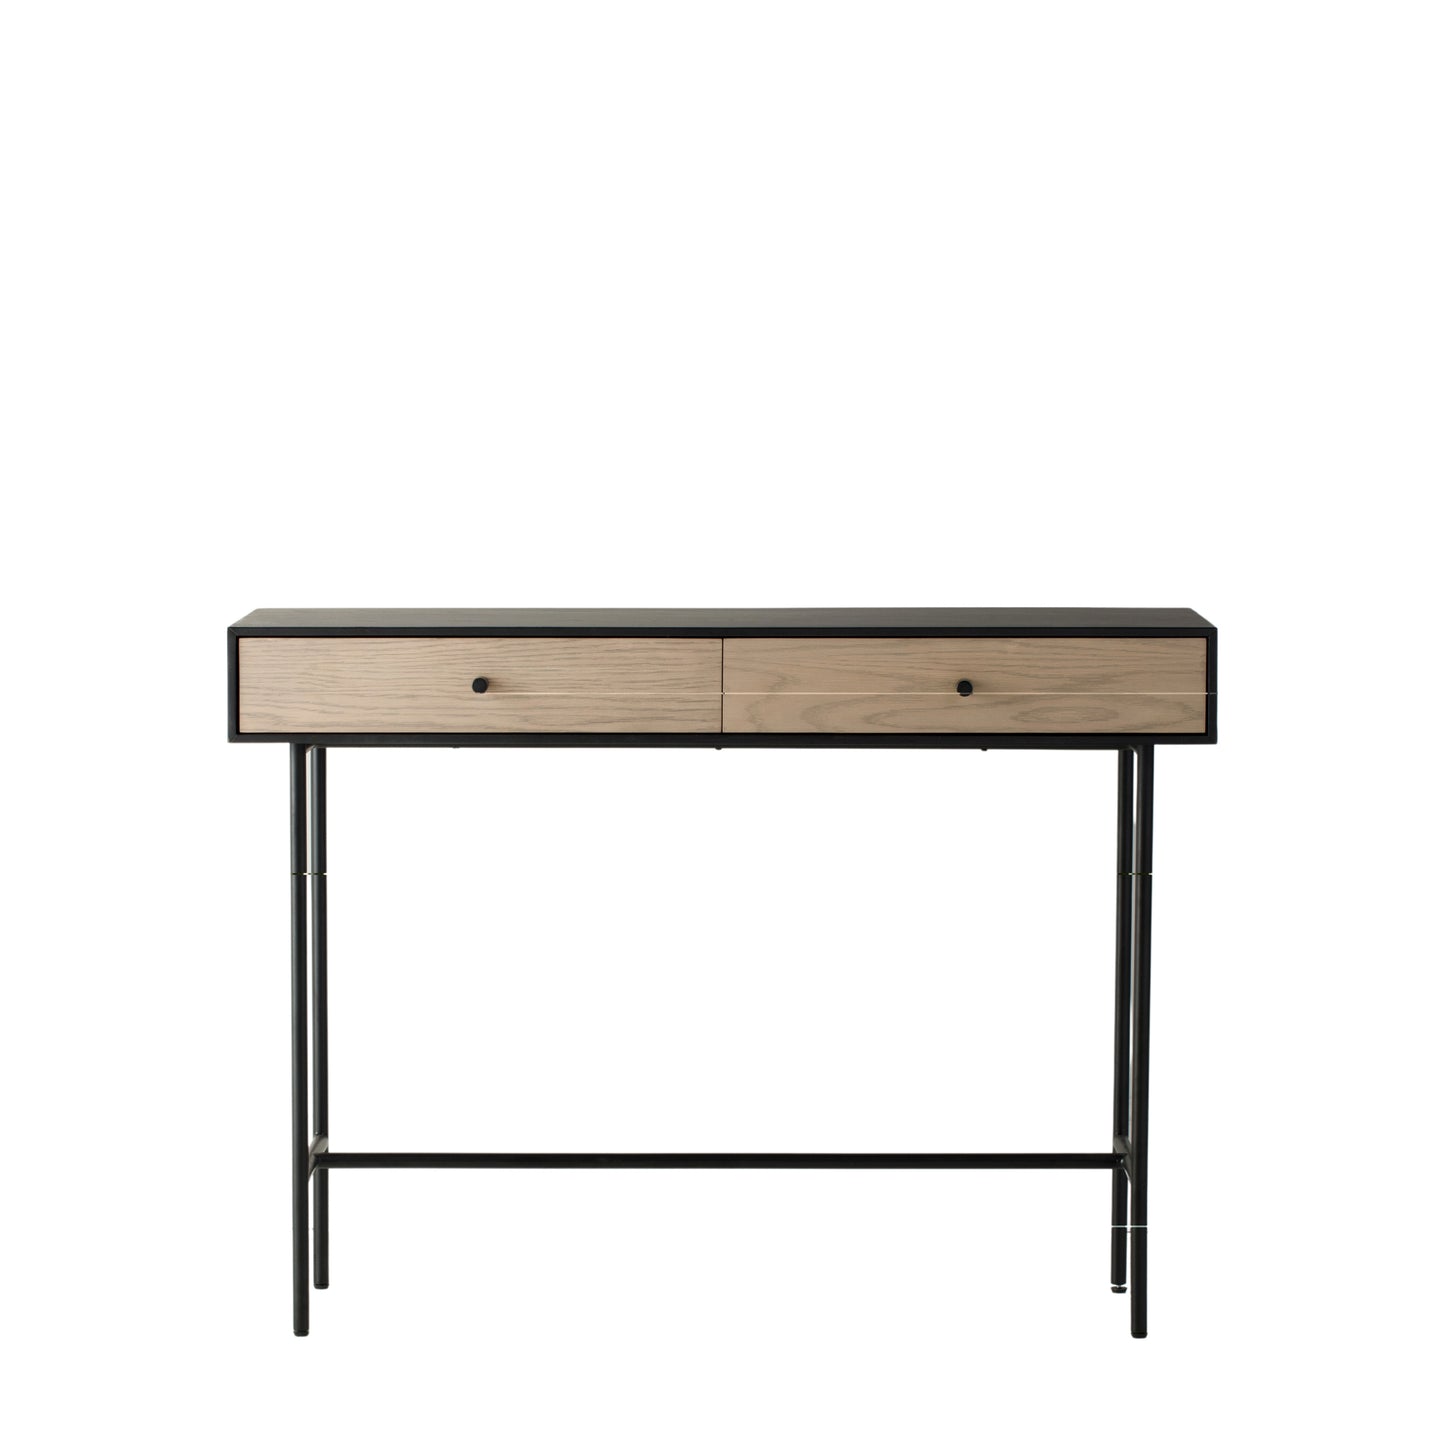 A Prawle 2 Drawer Console Table 1100x350x800mm by Kikiathome.co.uk perfect for interior decor or home furniture.